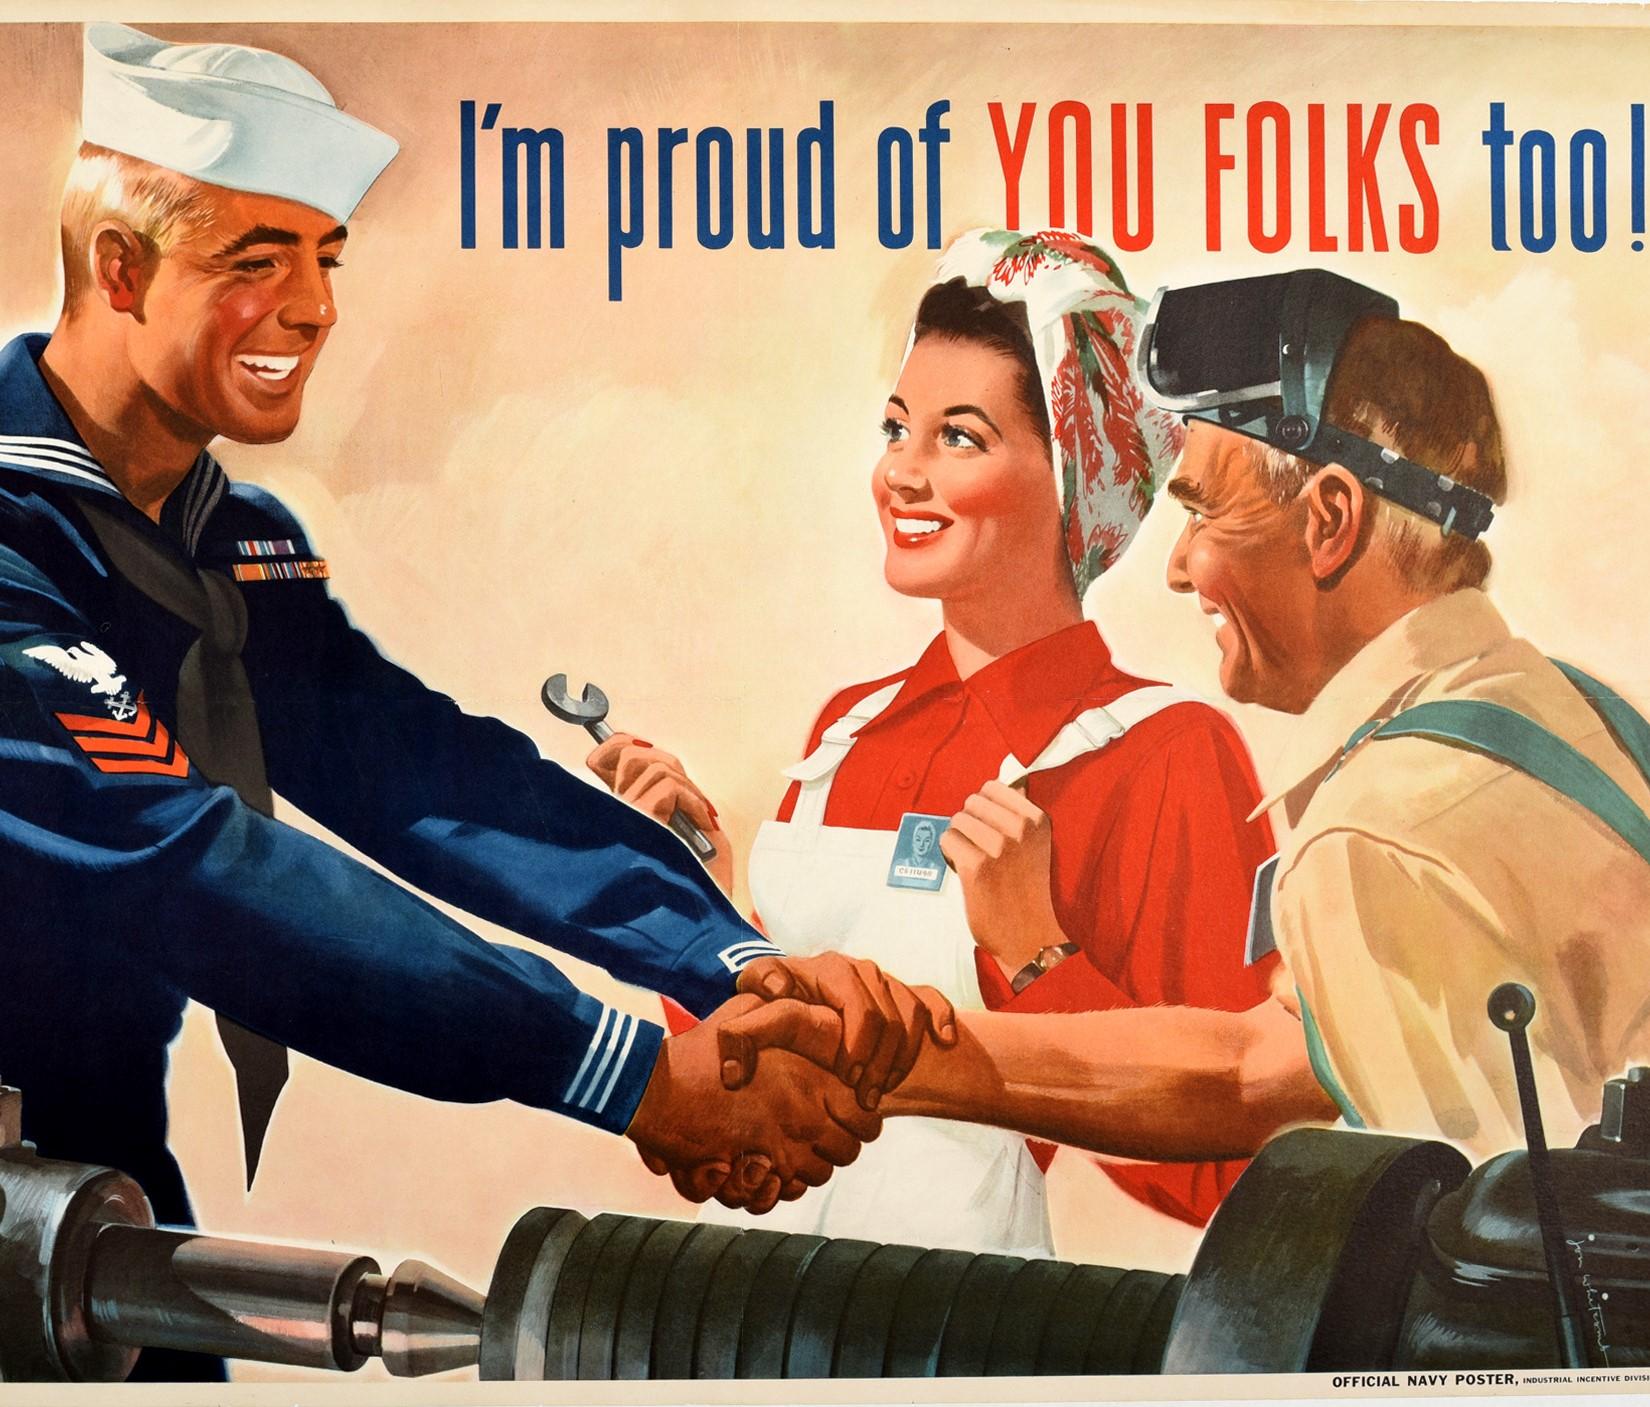 Original vintage World War Two propaganda poster - I'm Proud of You Folks Too! - encouraging people at home to join in the war effort featuring a smiling young sailor in US Navy uniform shaking hands with an older man working as an industrial welder